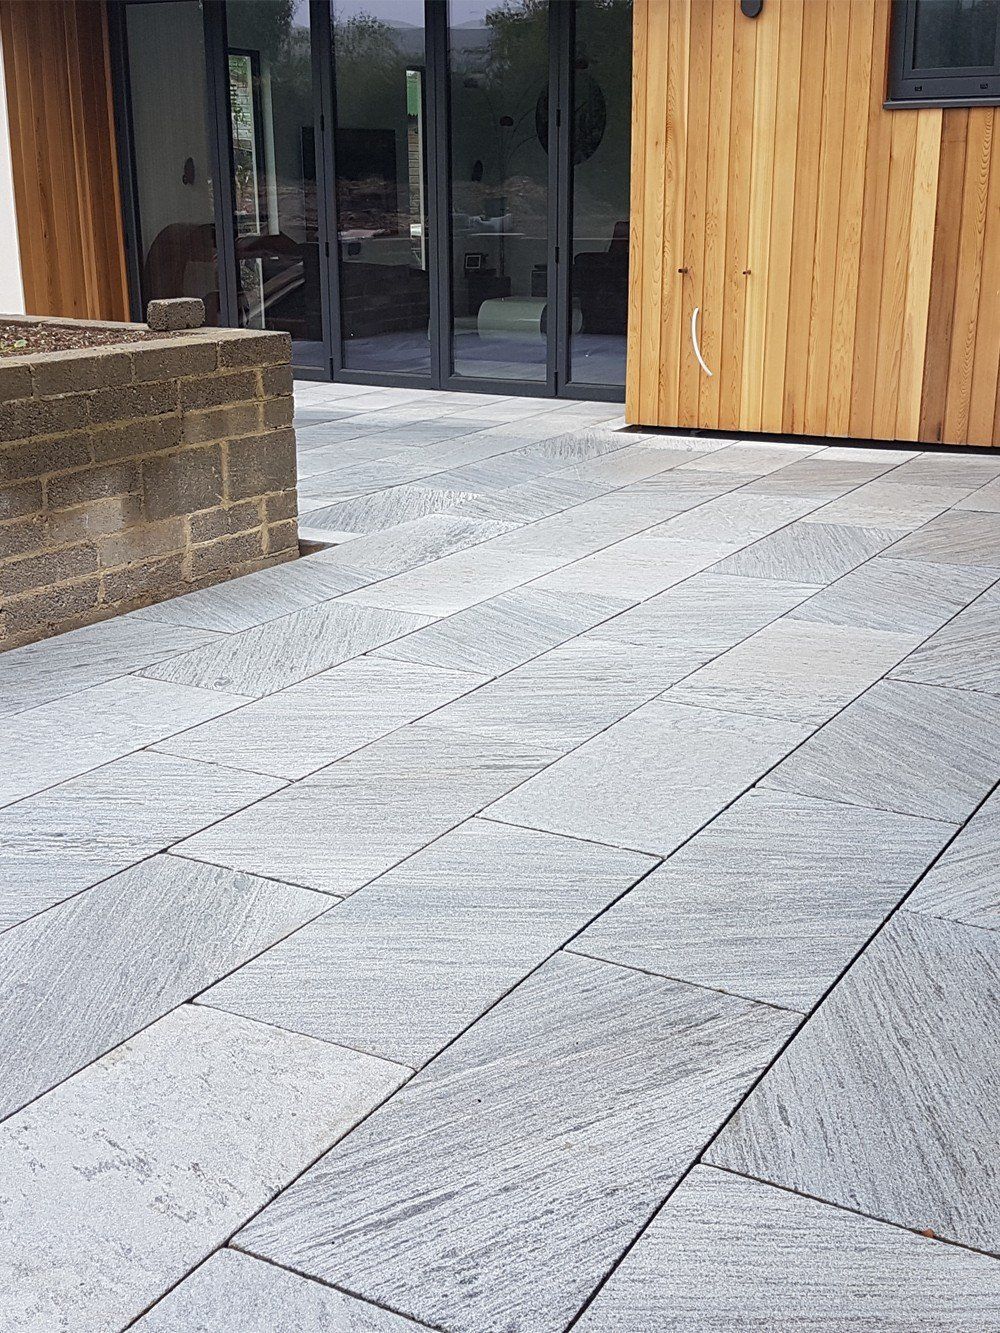 Fencing York new marble patio